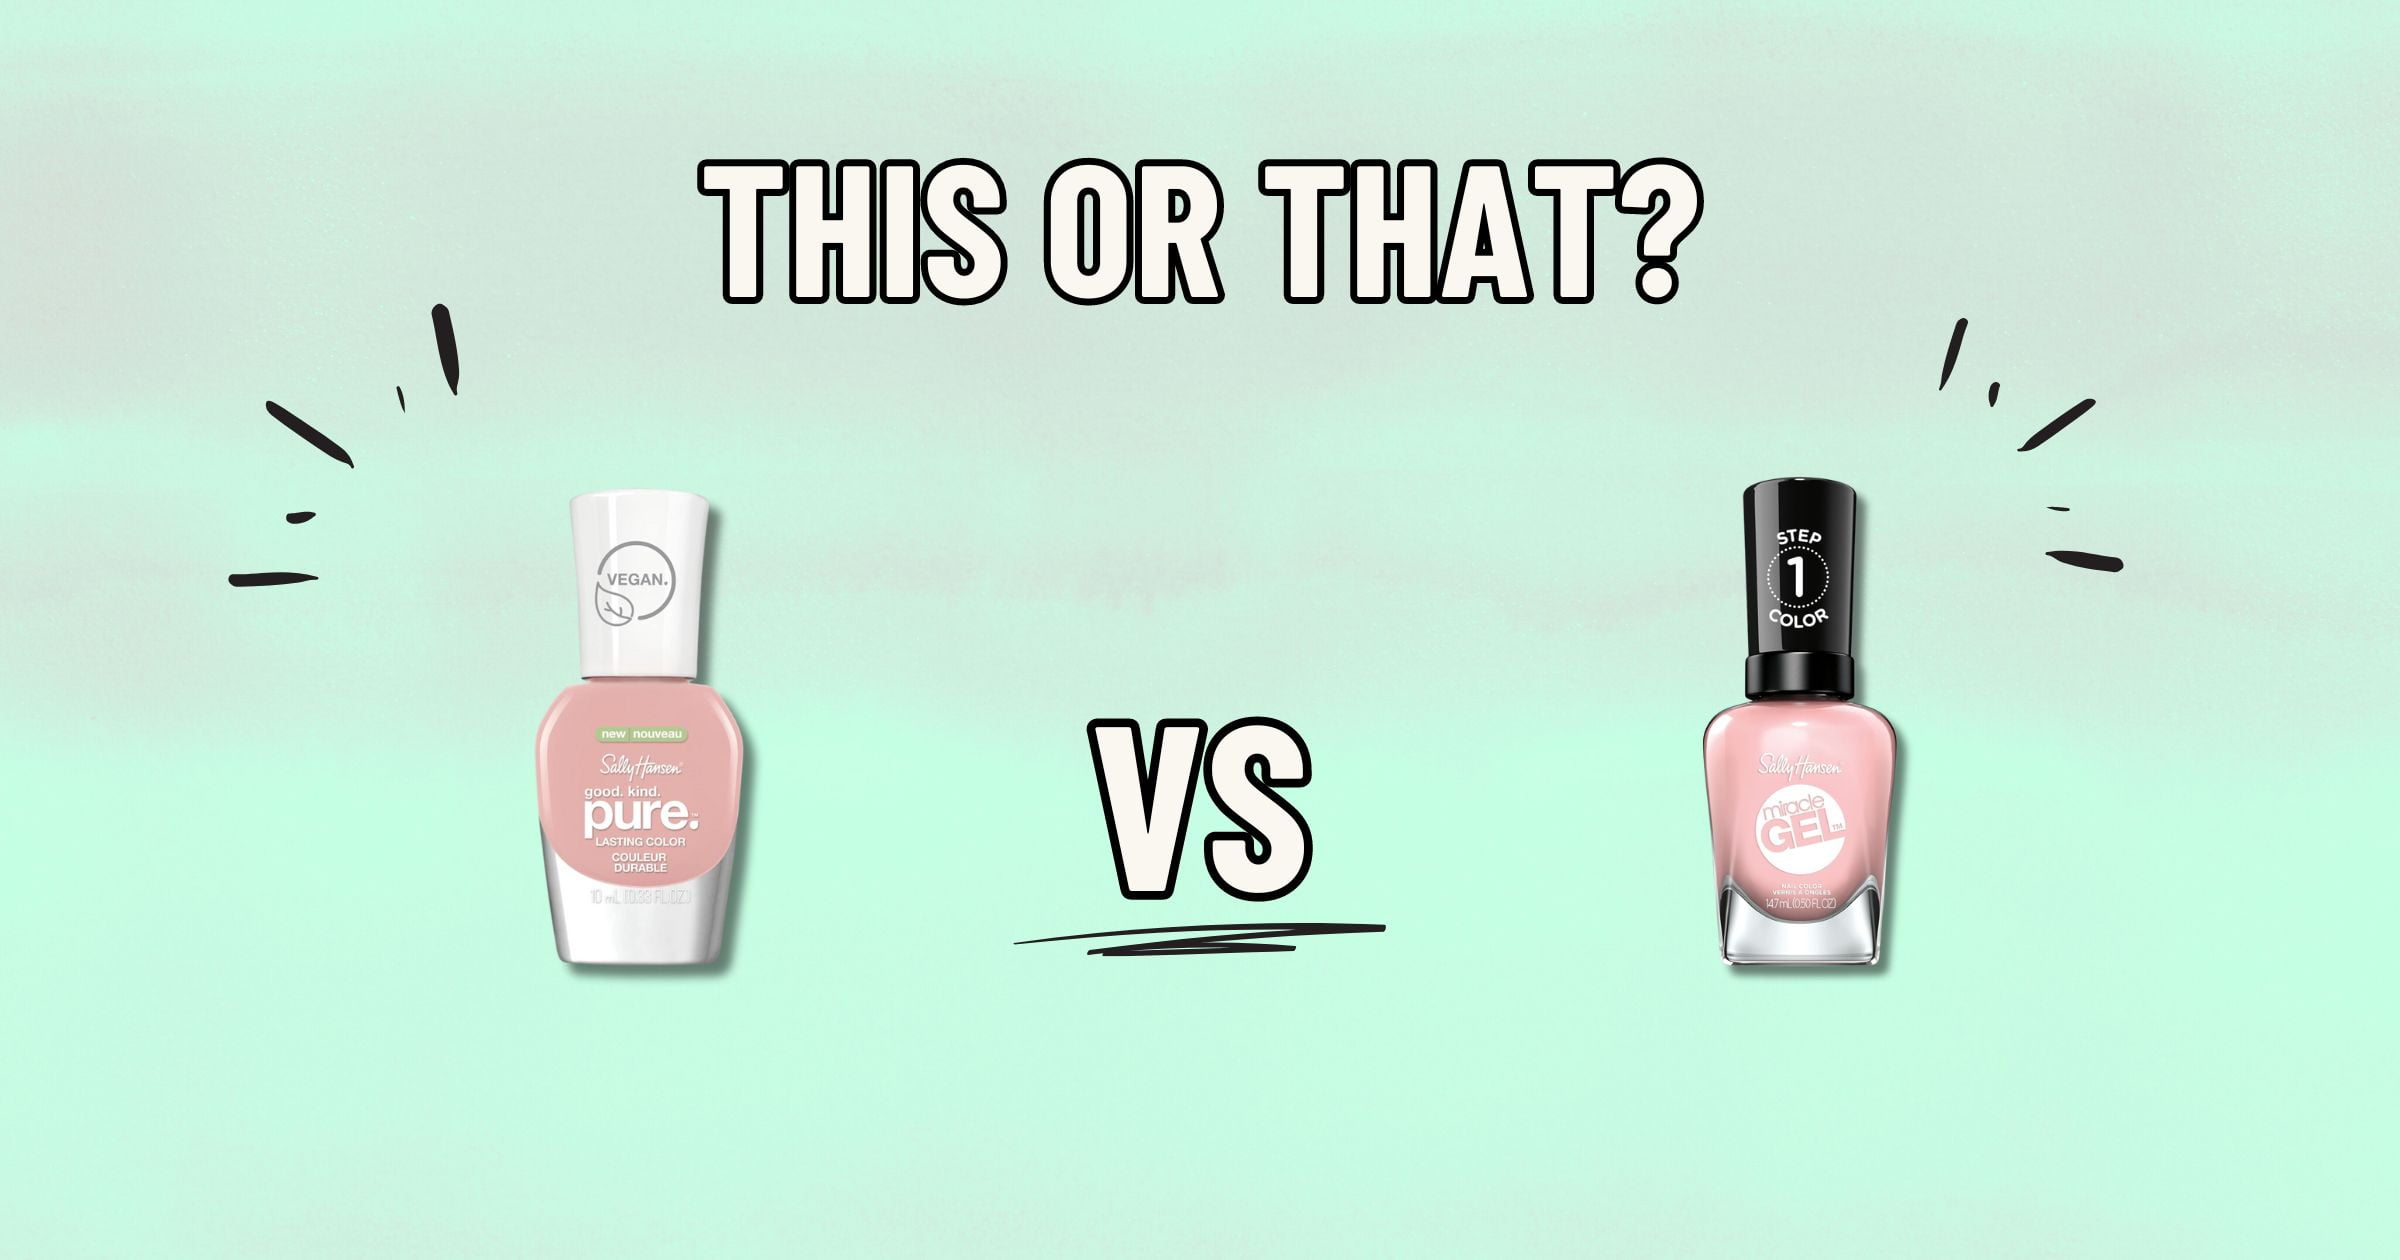 A soft green background features two nail polish bottles with "THIS OR THAT?" written above. On the left is a white-capped bottle labeled "Sally Hansen pure." with pale pink regular nail polish. On the right is a black-capped bottle labeled "Sally Hansen Miracle Gel" with pink gel nail polish. "VS" is written in between.